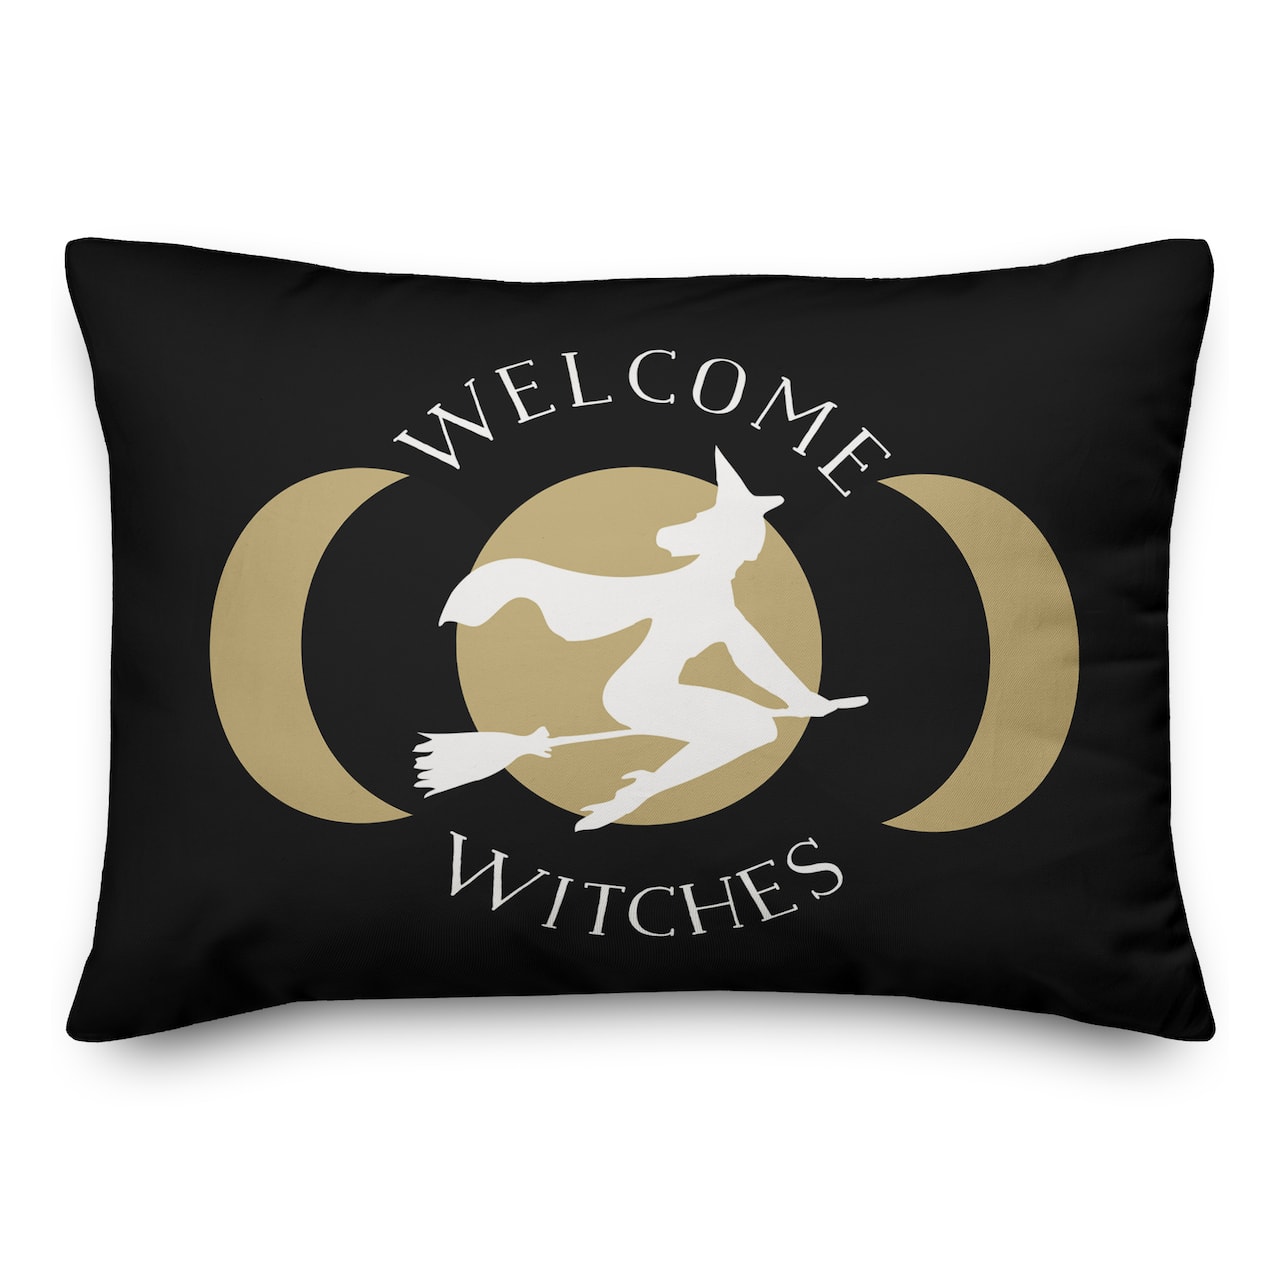 Welcome Witches Throw Pillow